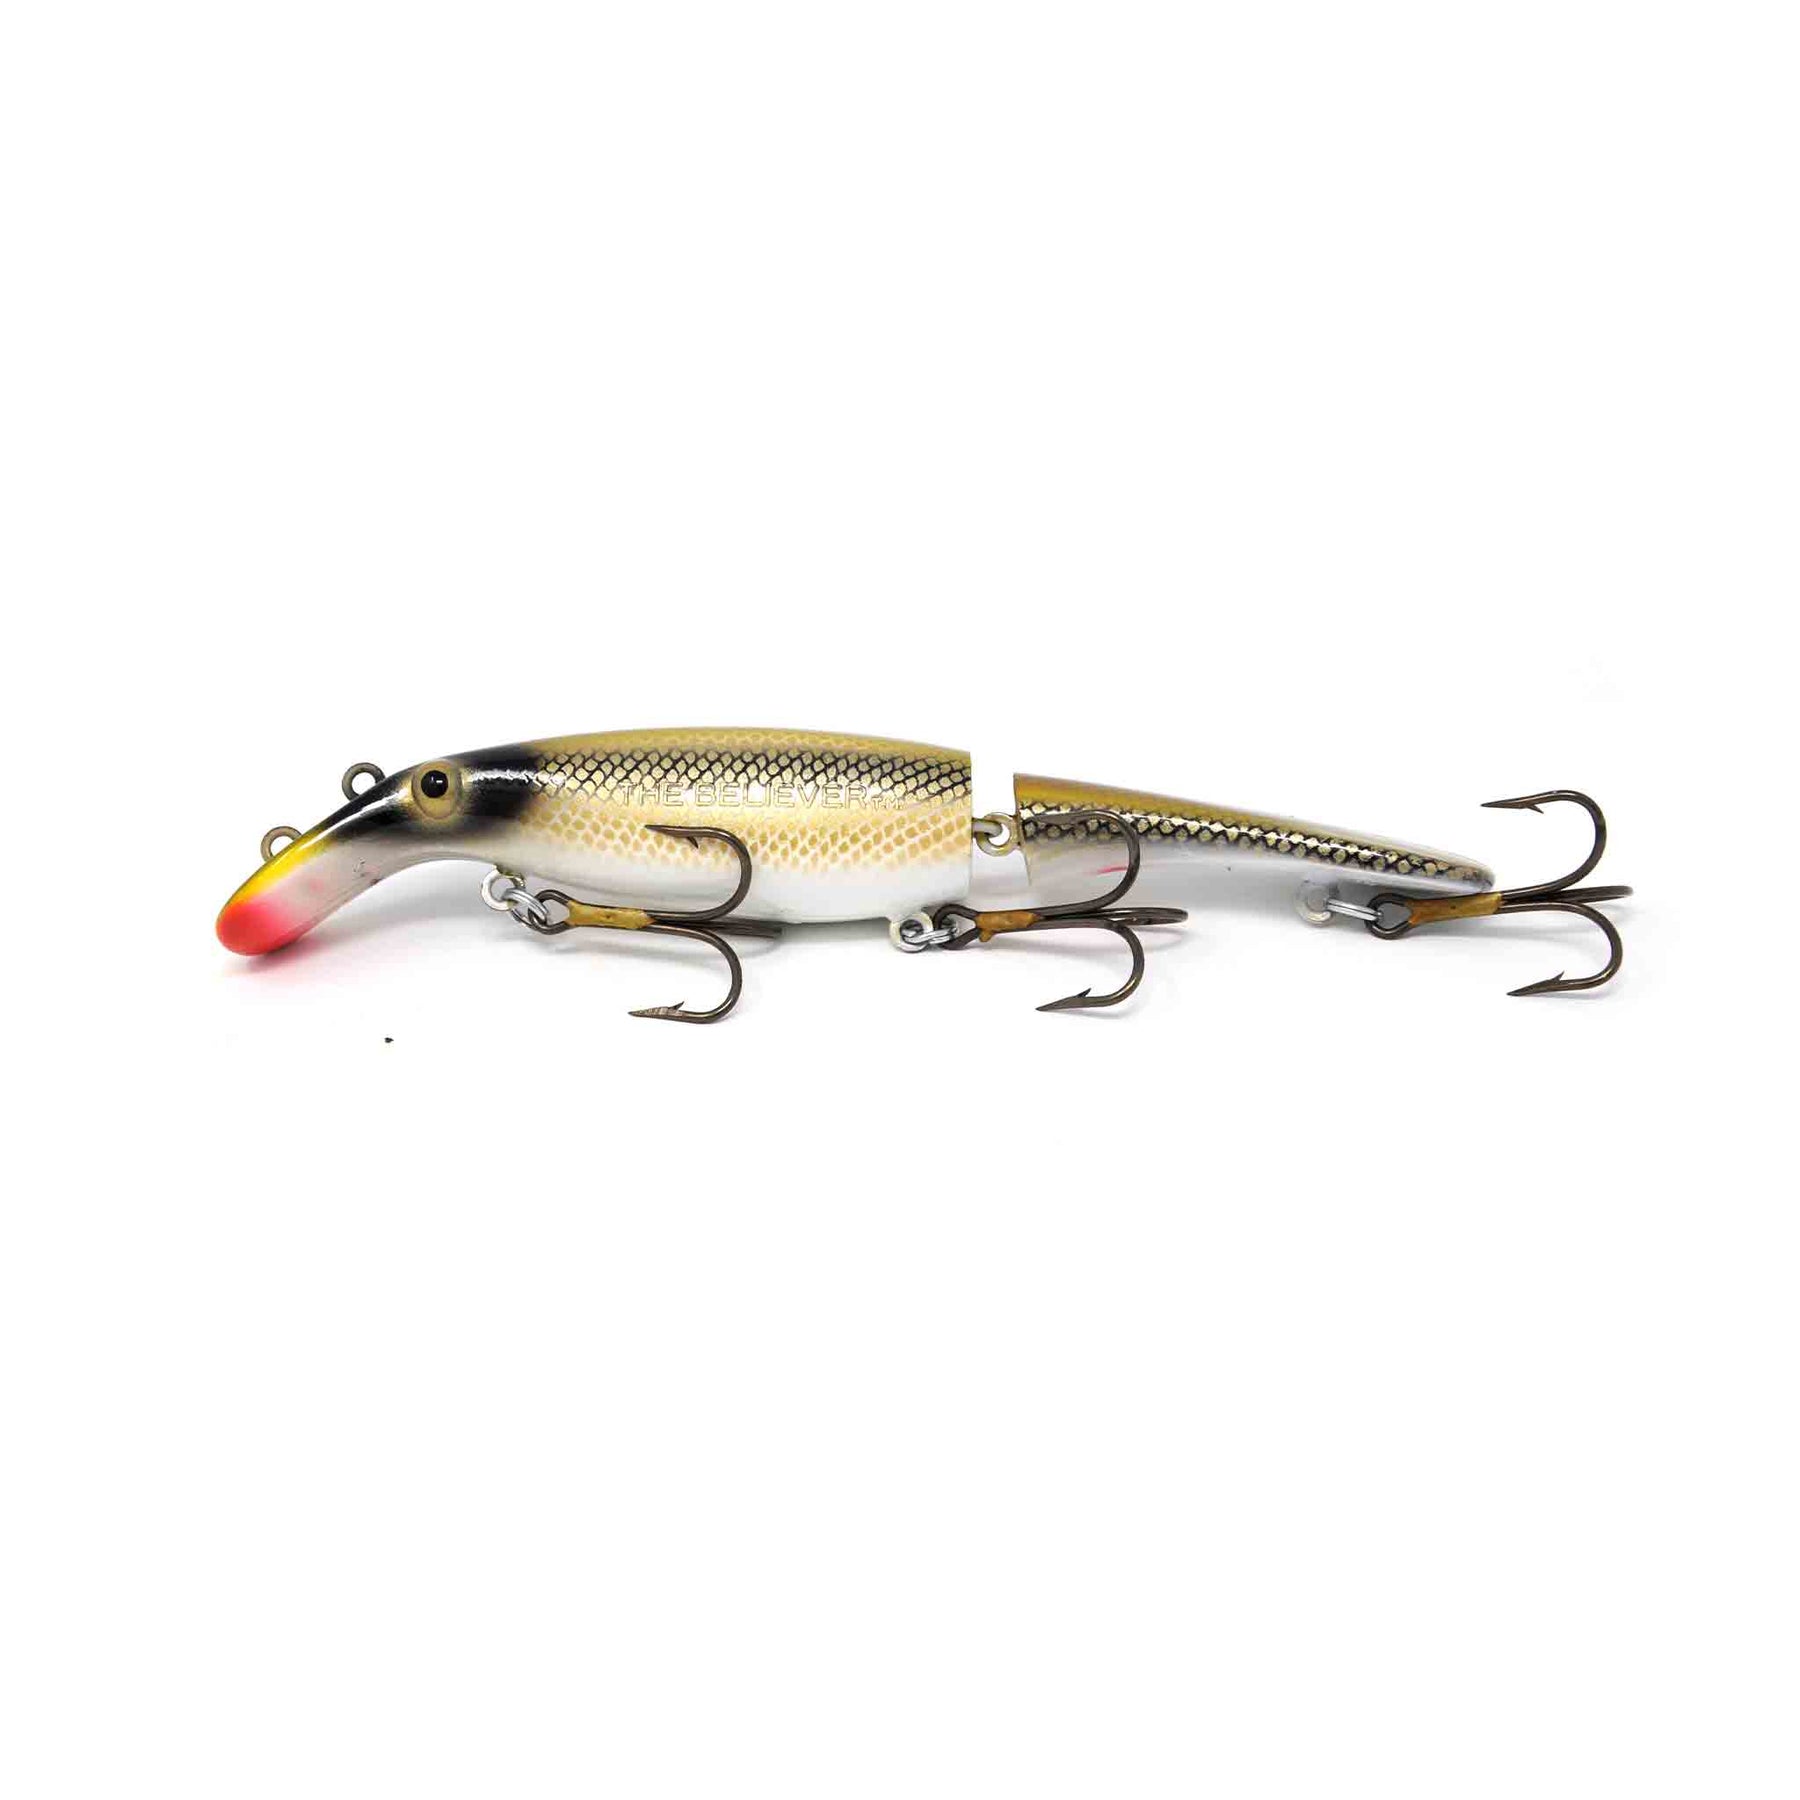 Drifter Believer Muskie Jointed Tail Lure 8 Walleye